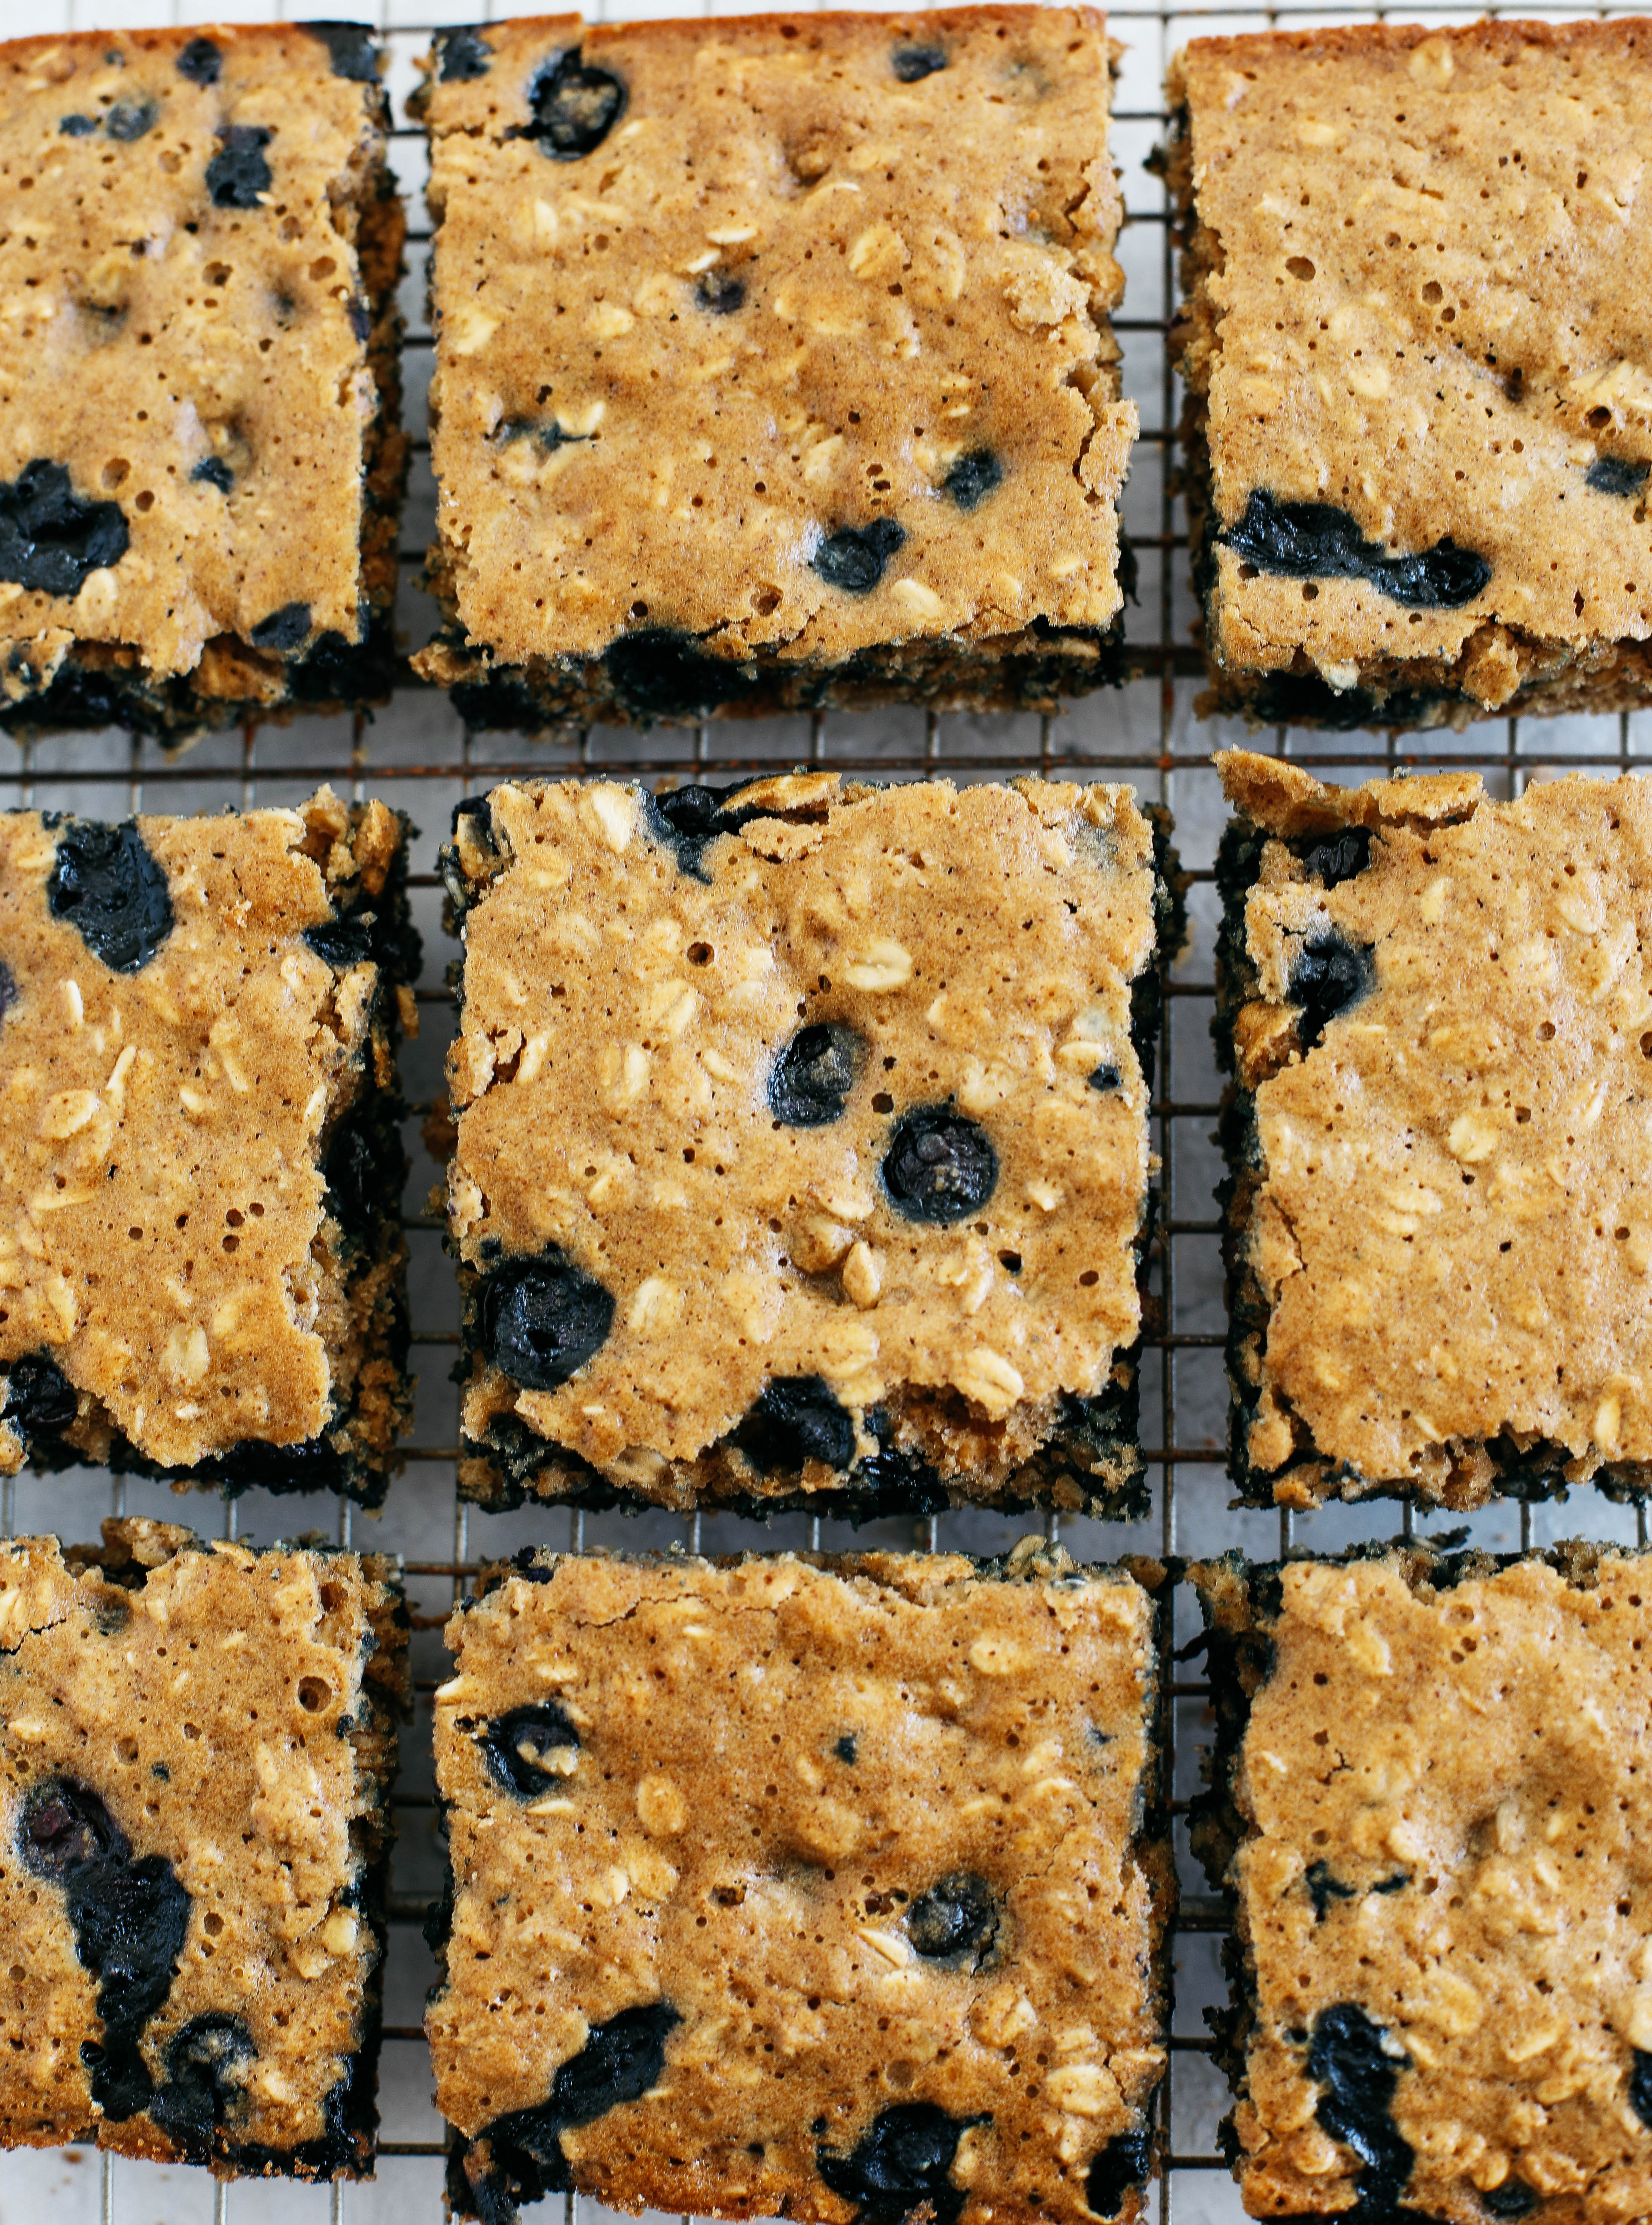 These delicious Blueberry Oatmeal Breakfast Bars make a quick on-the-go breakfast or snack option that are healthy, kid-friendly and super easy to throw together!